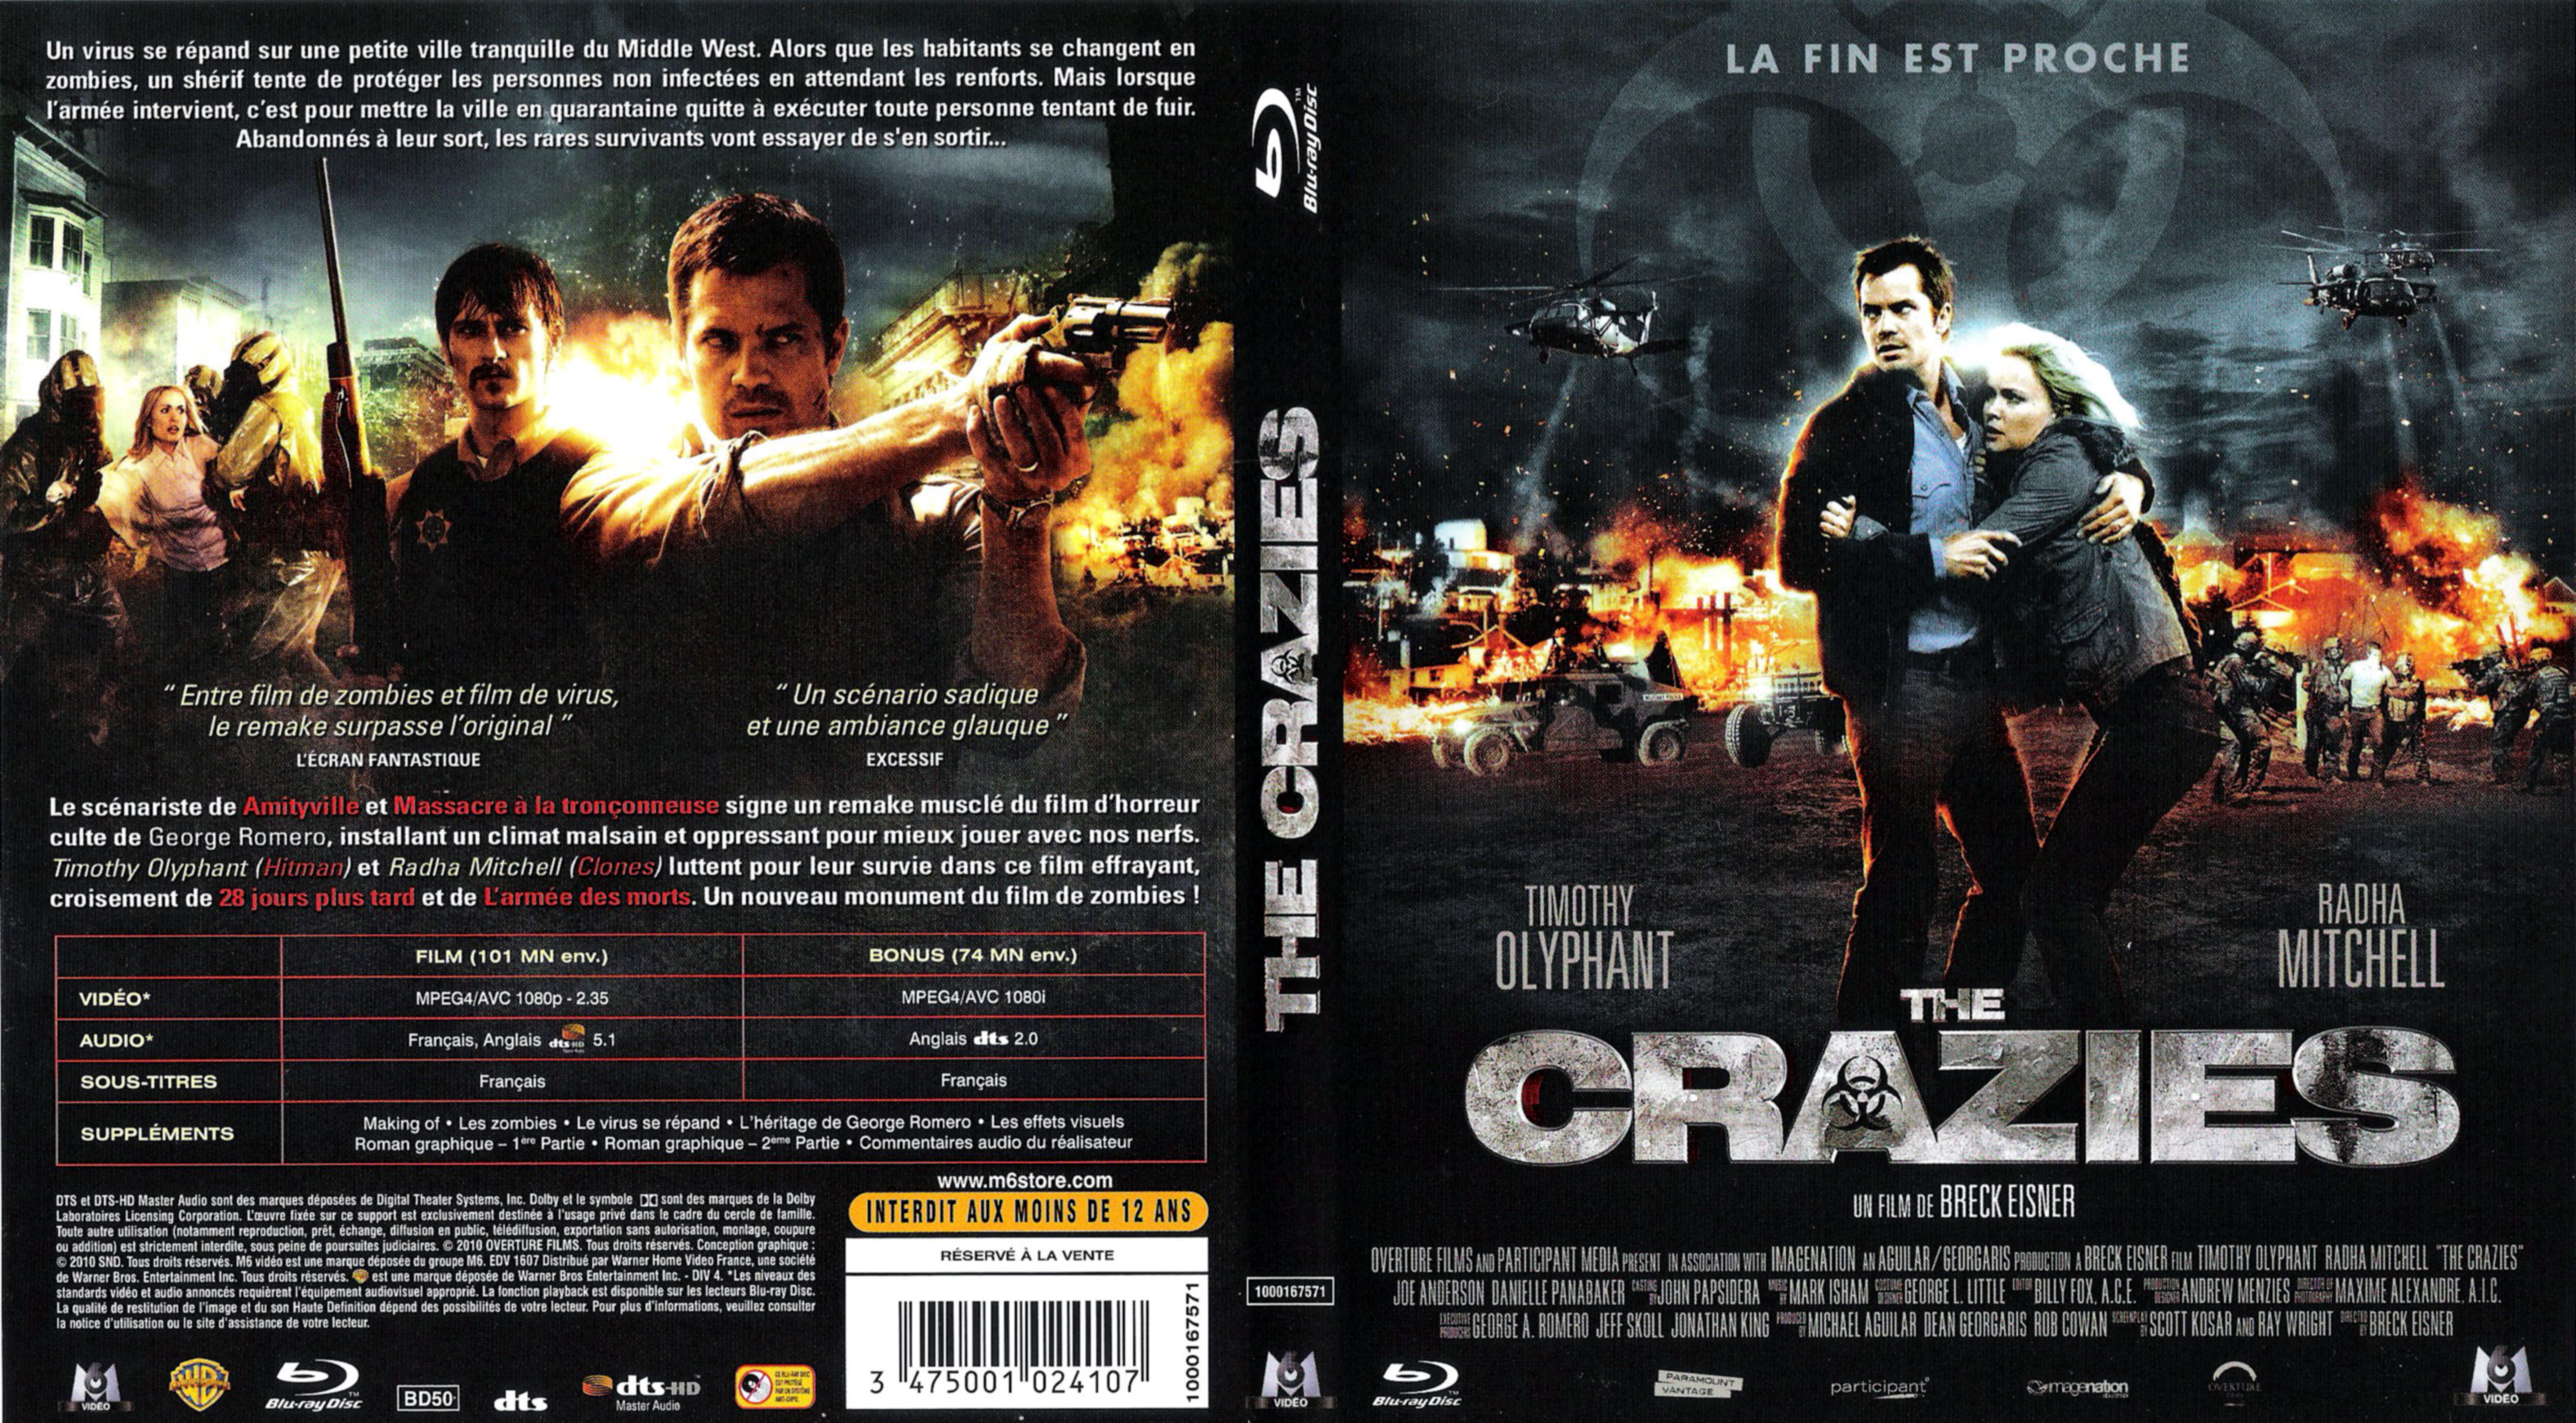 Jaquette DVD The crazies (2010) (BLU-RAY)